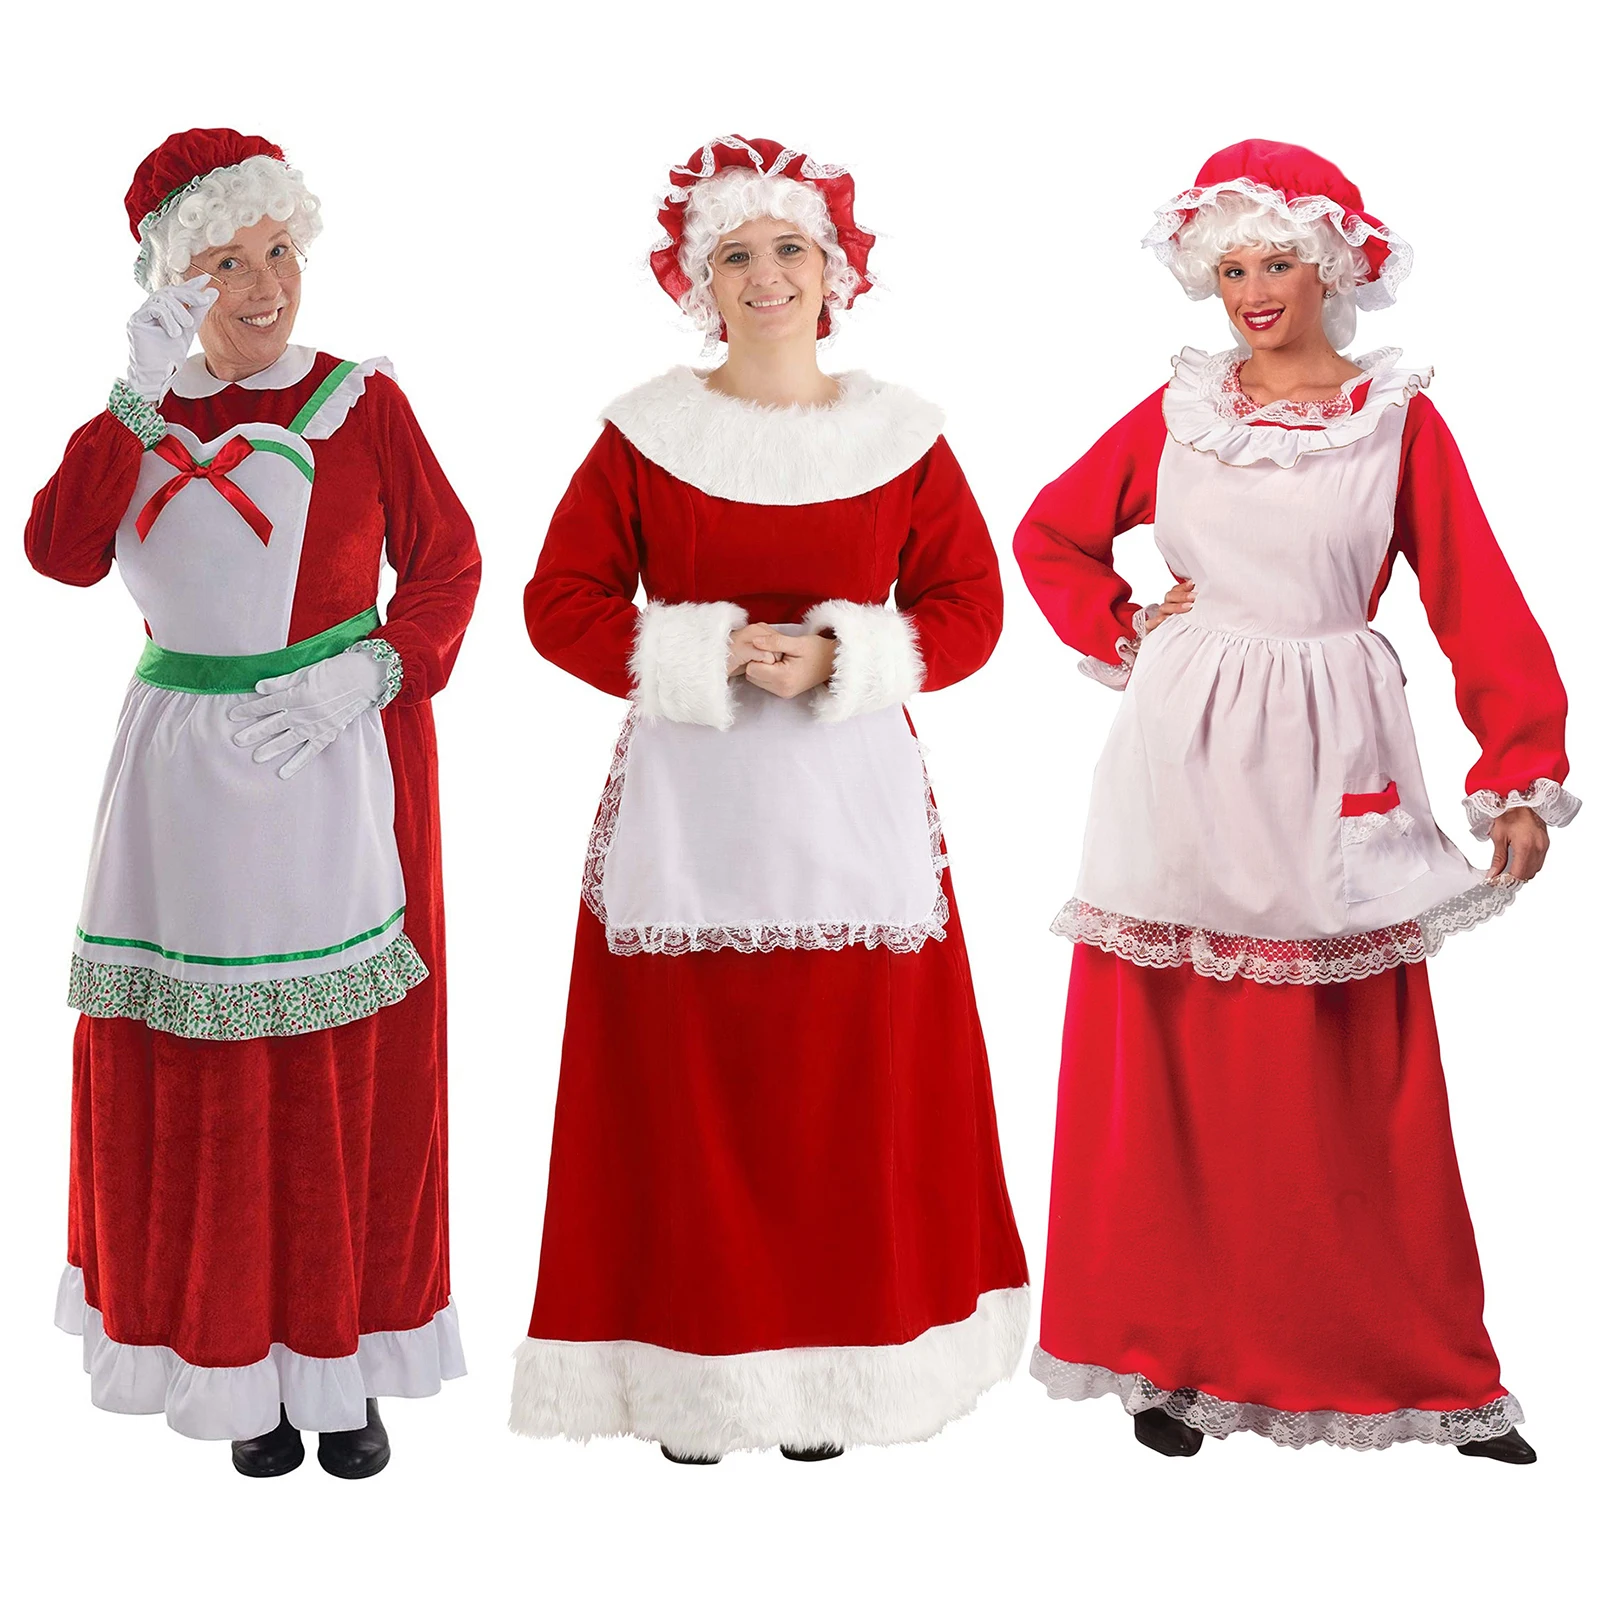 Women Cosplay Costume Set Maid Granny Long Sleeves Dress with Hat Apron for Christmas Halloween Role-playing